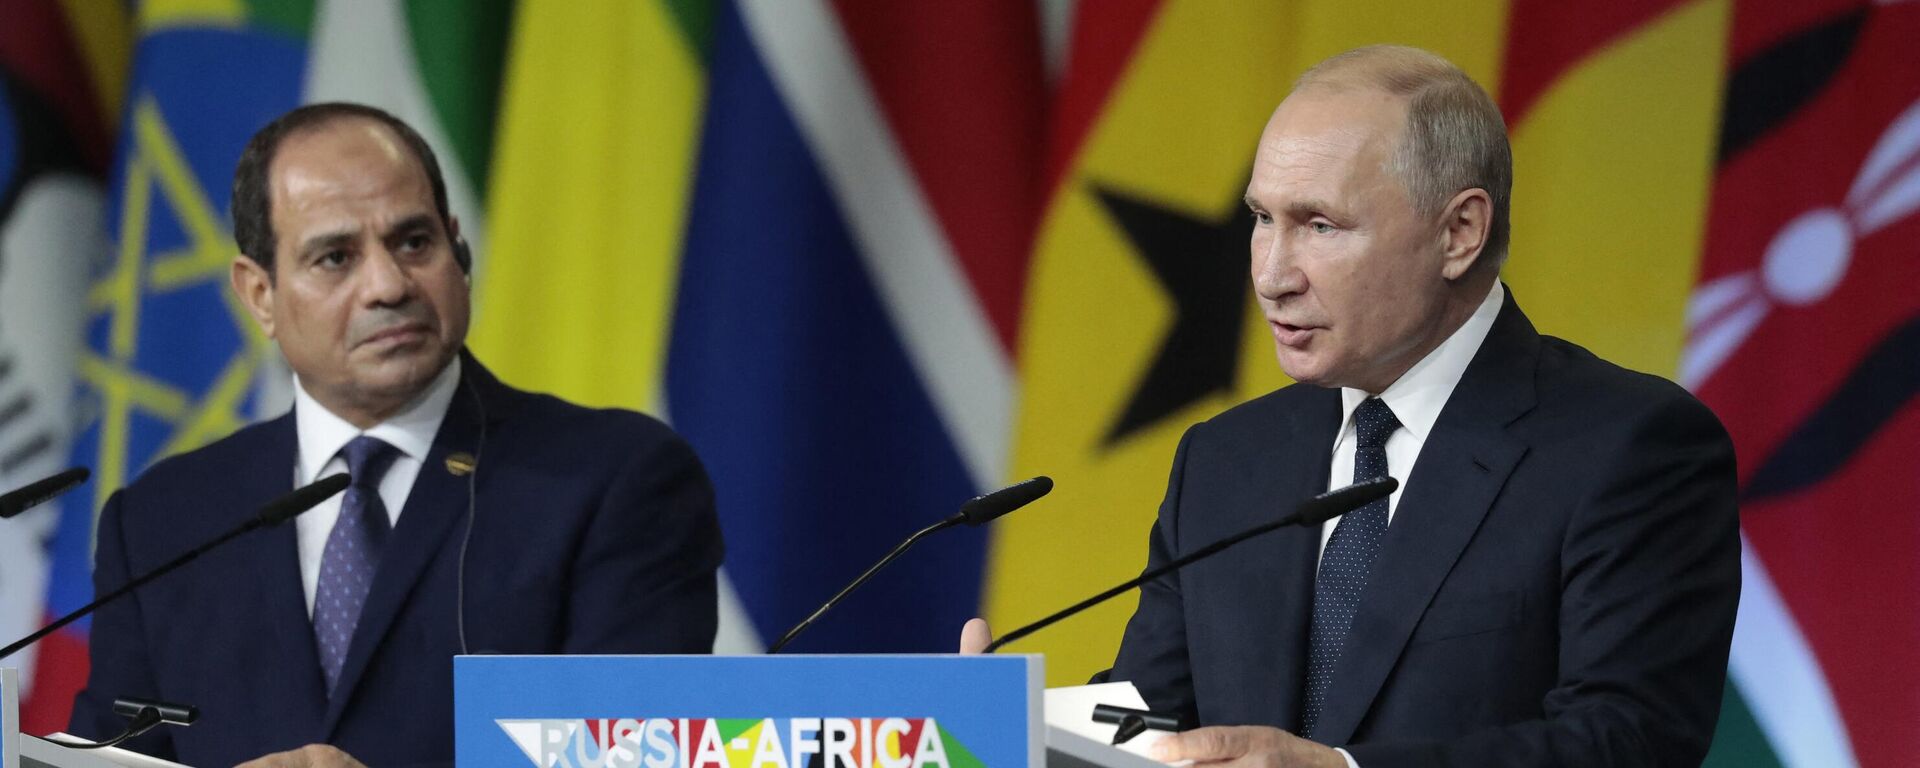 Russia's President Vladimir Putin and Egypt's President Abdel Fattah al-Sisi make a press statement following the 2019 Russia-Africa Summit at the Sirius Park of Science and Art in Sochi, Russia, on October 24, 2019 - Sputnik International, 1920, 03.04.2023